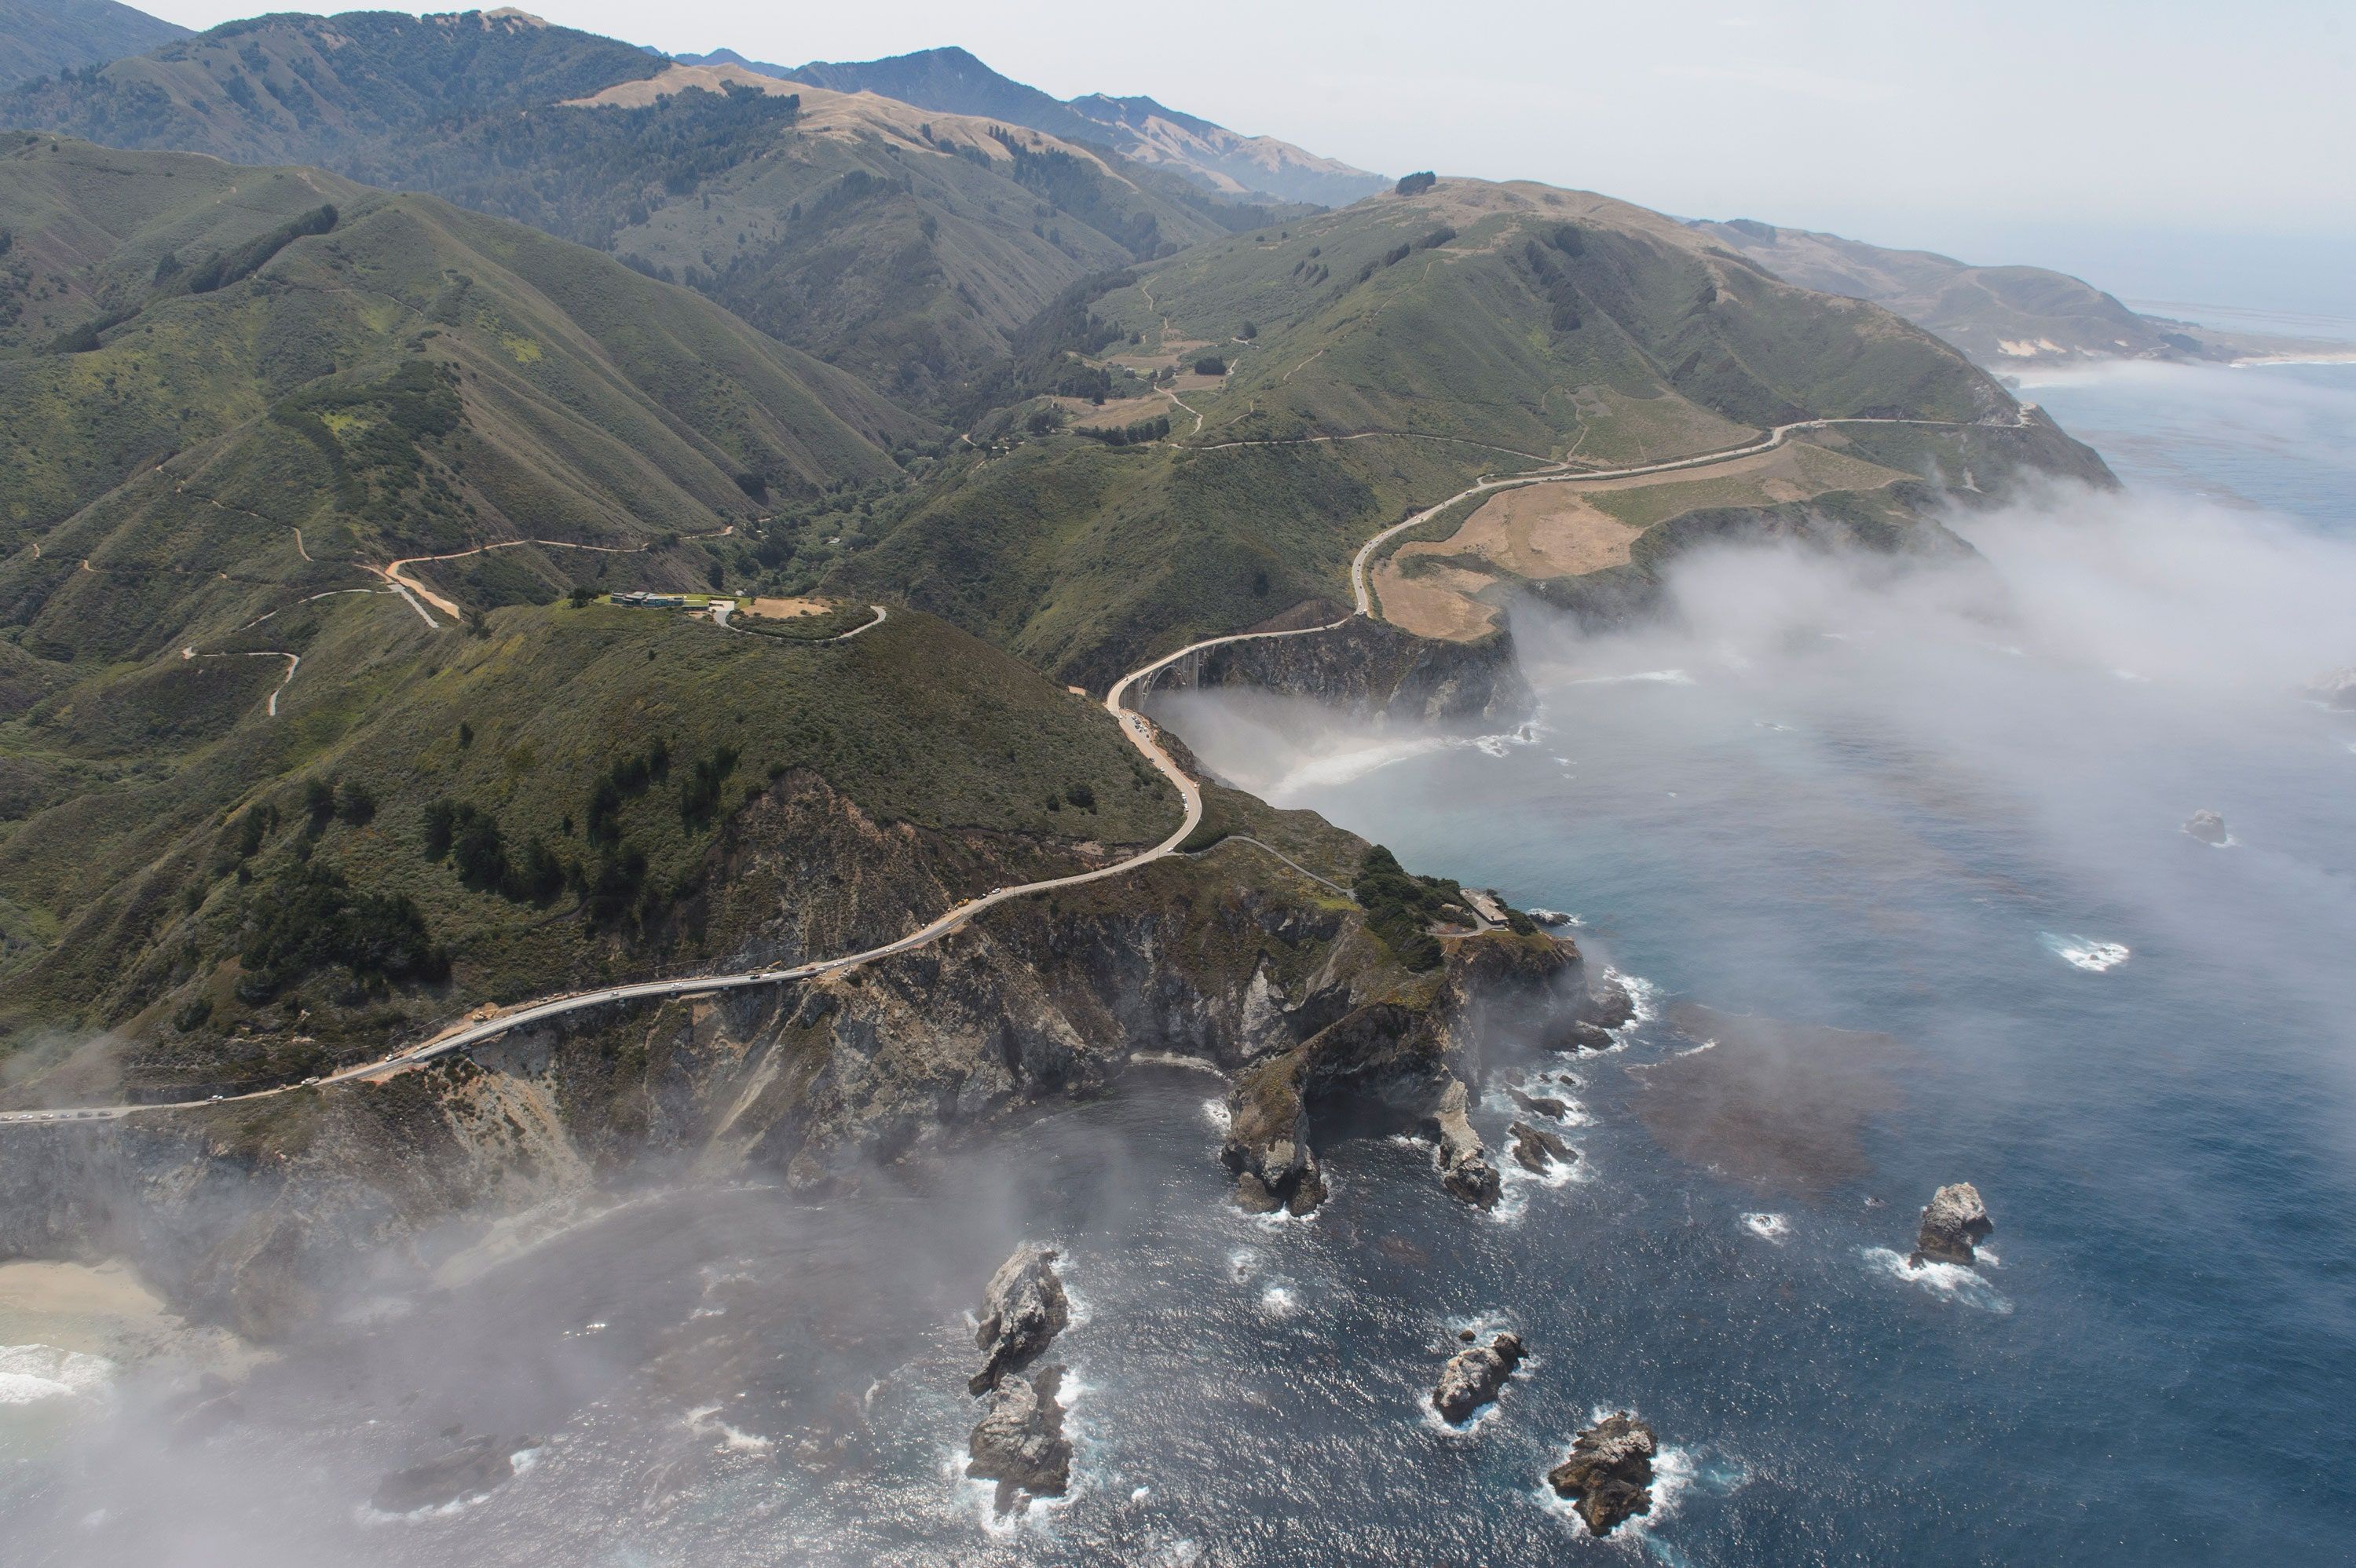 California Highway 1: The Essential Road Trip Itinerary